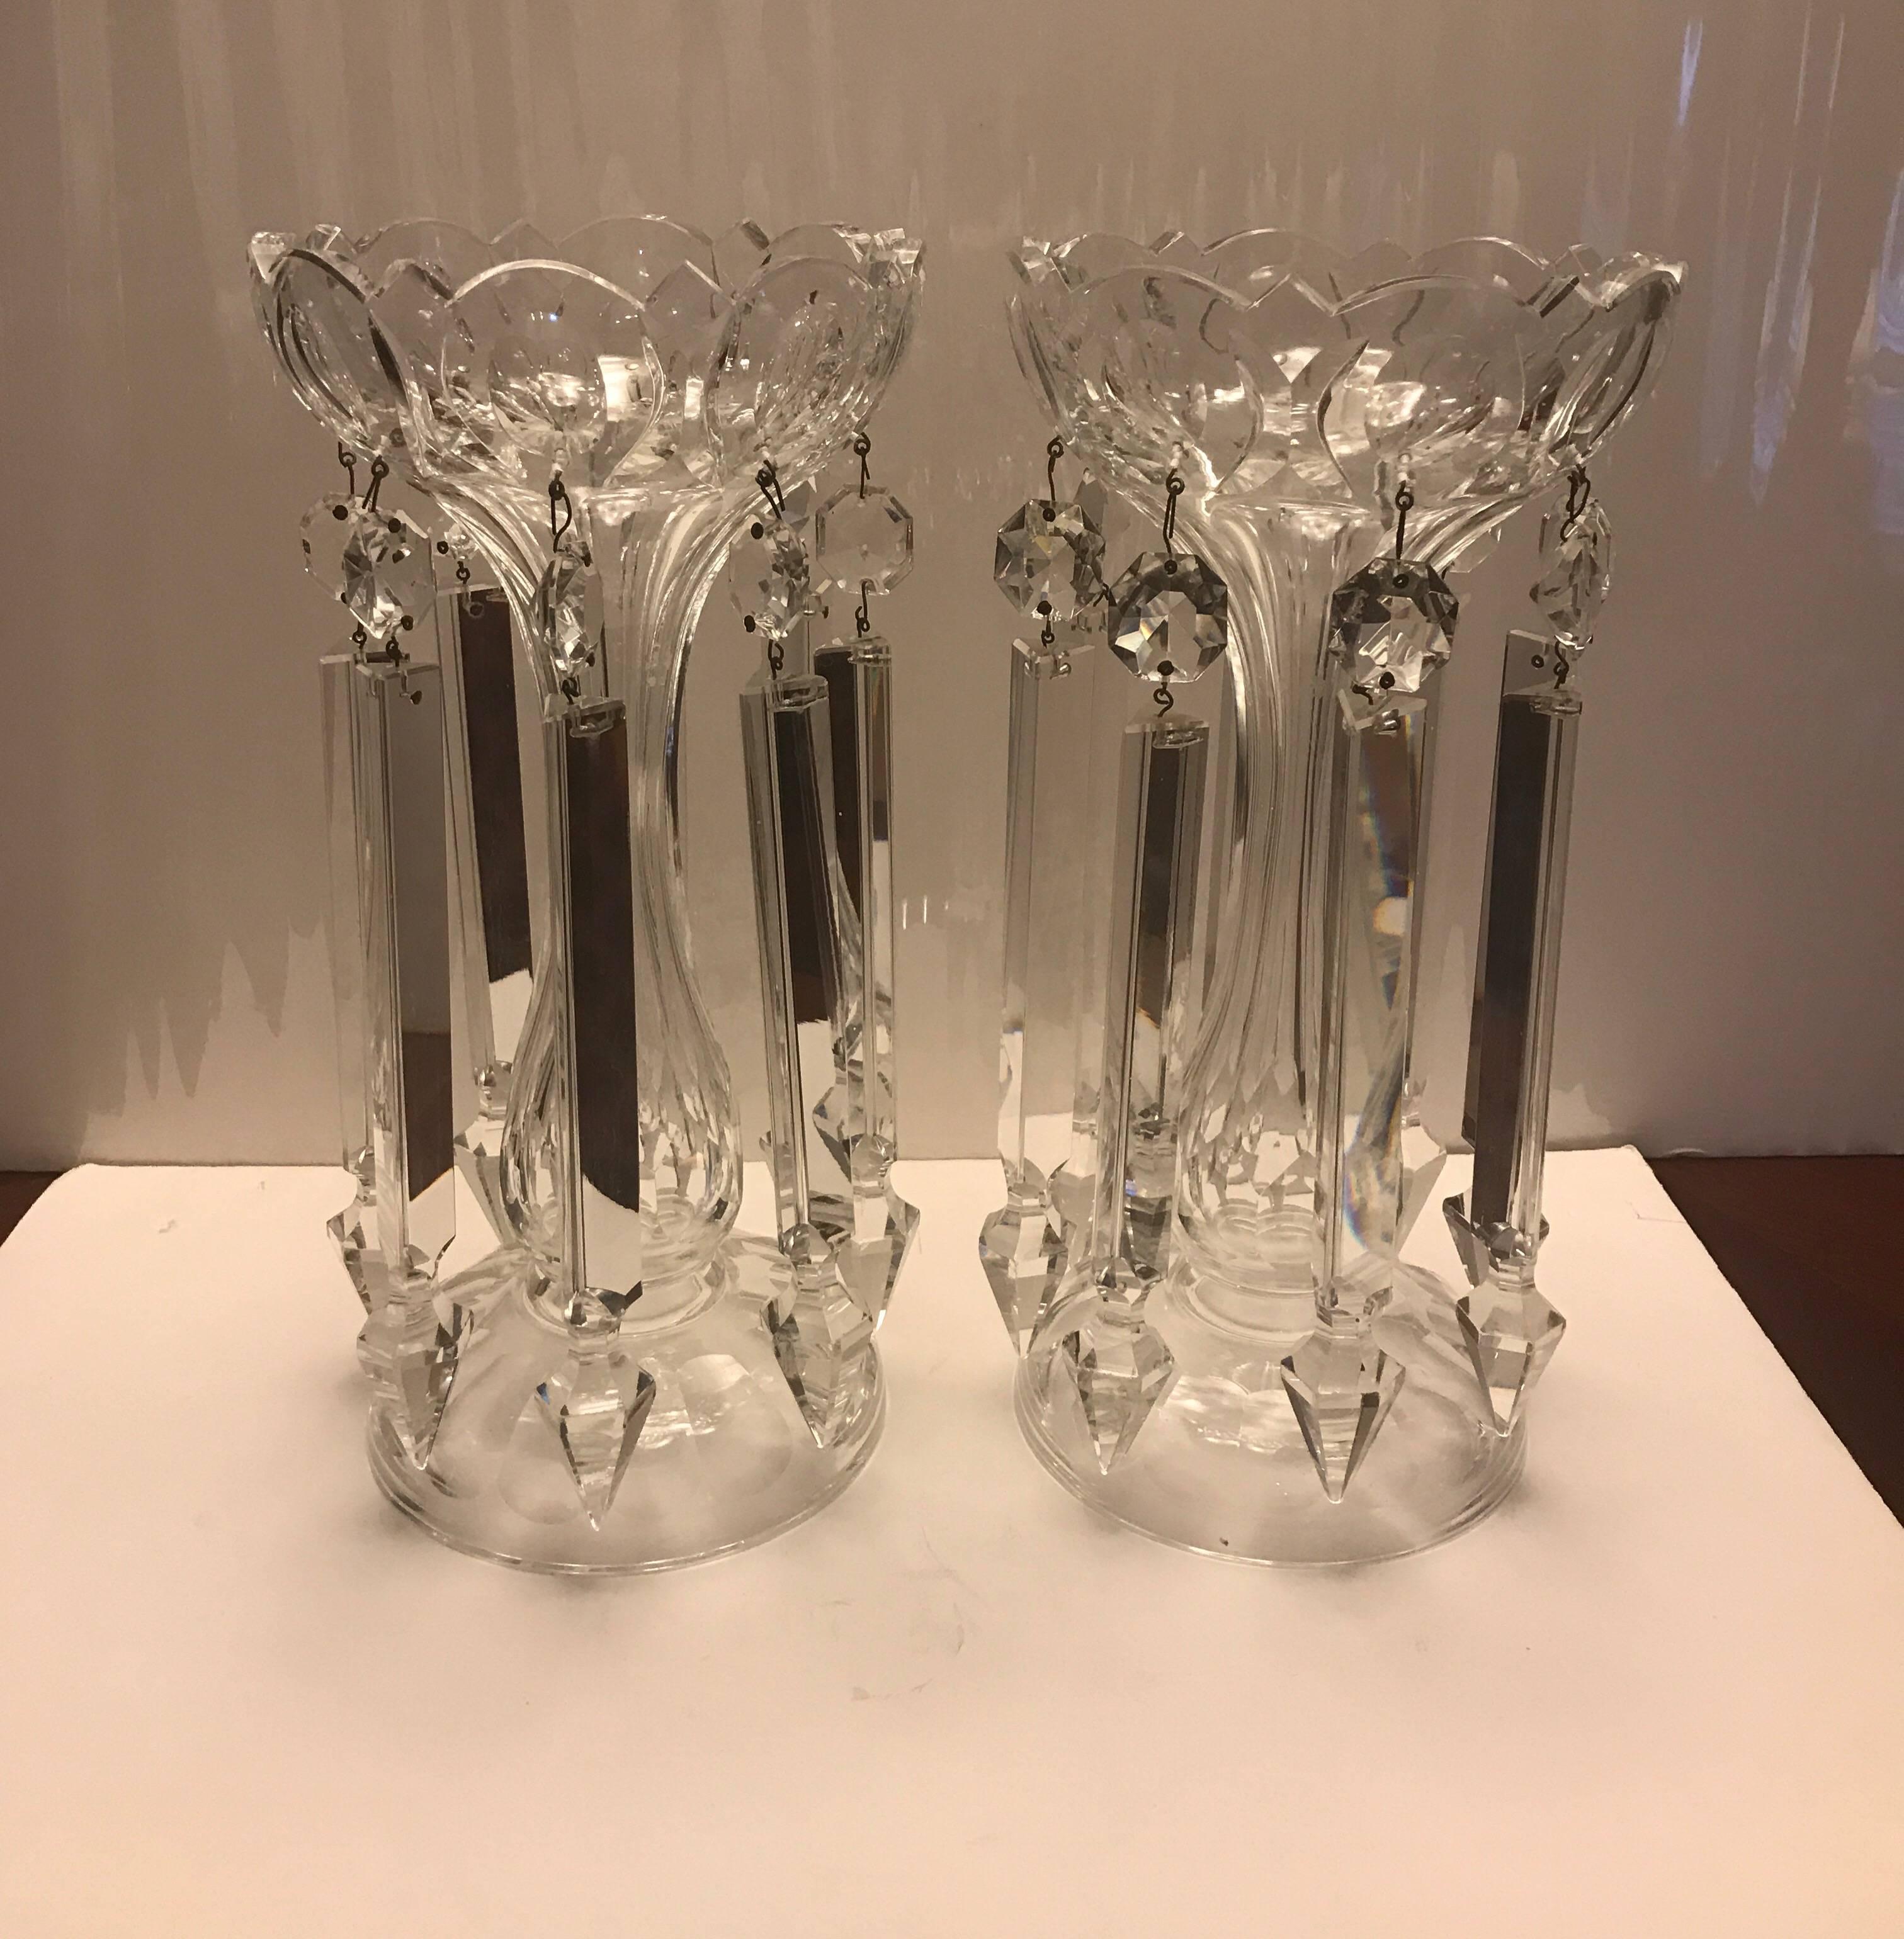 A pair of elegant cut-glass mantel lusters. The bowl tops with tapered panel cut centers with round bases. The candle holders have shimmering mirror like long cut speared prisms all around. Hand blown, handcut on a wheel.